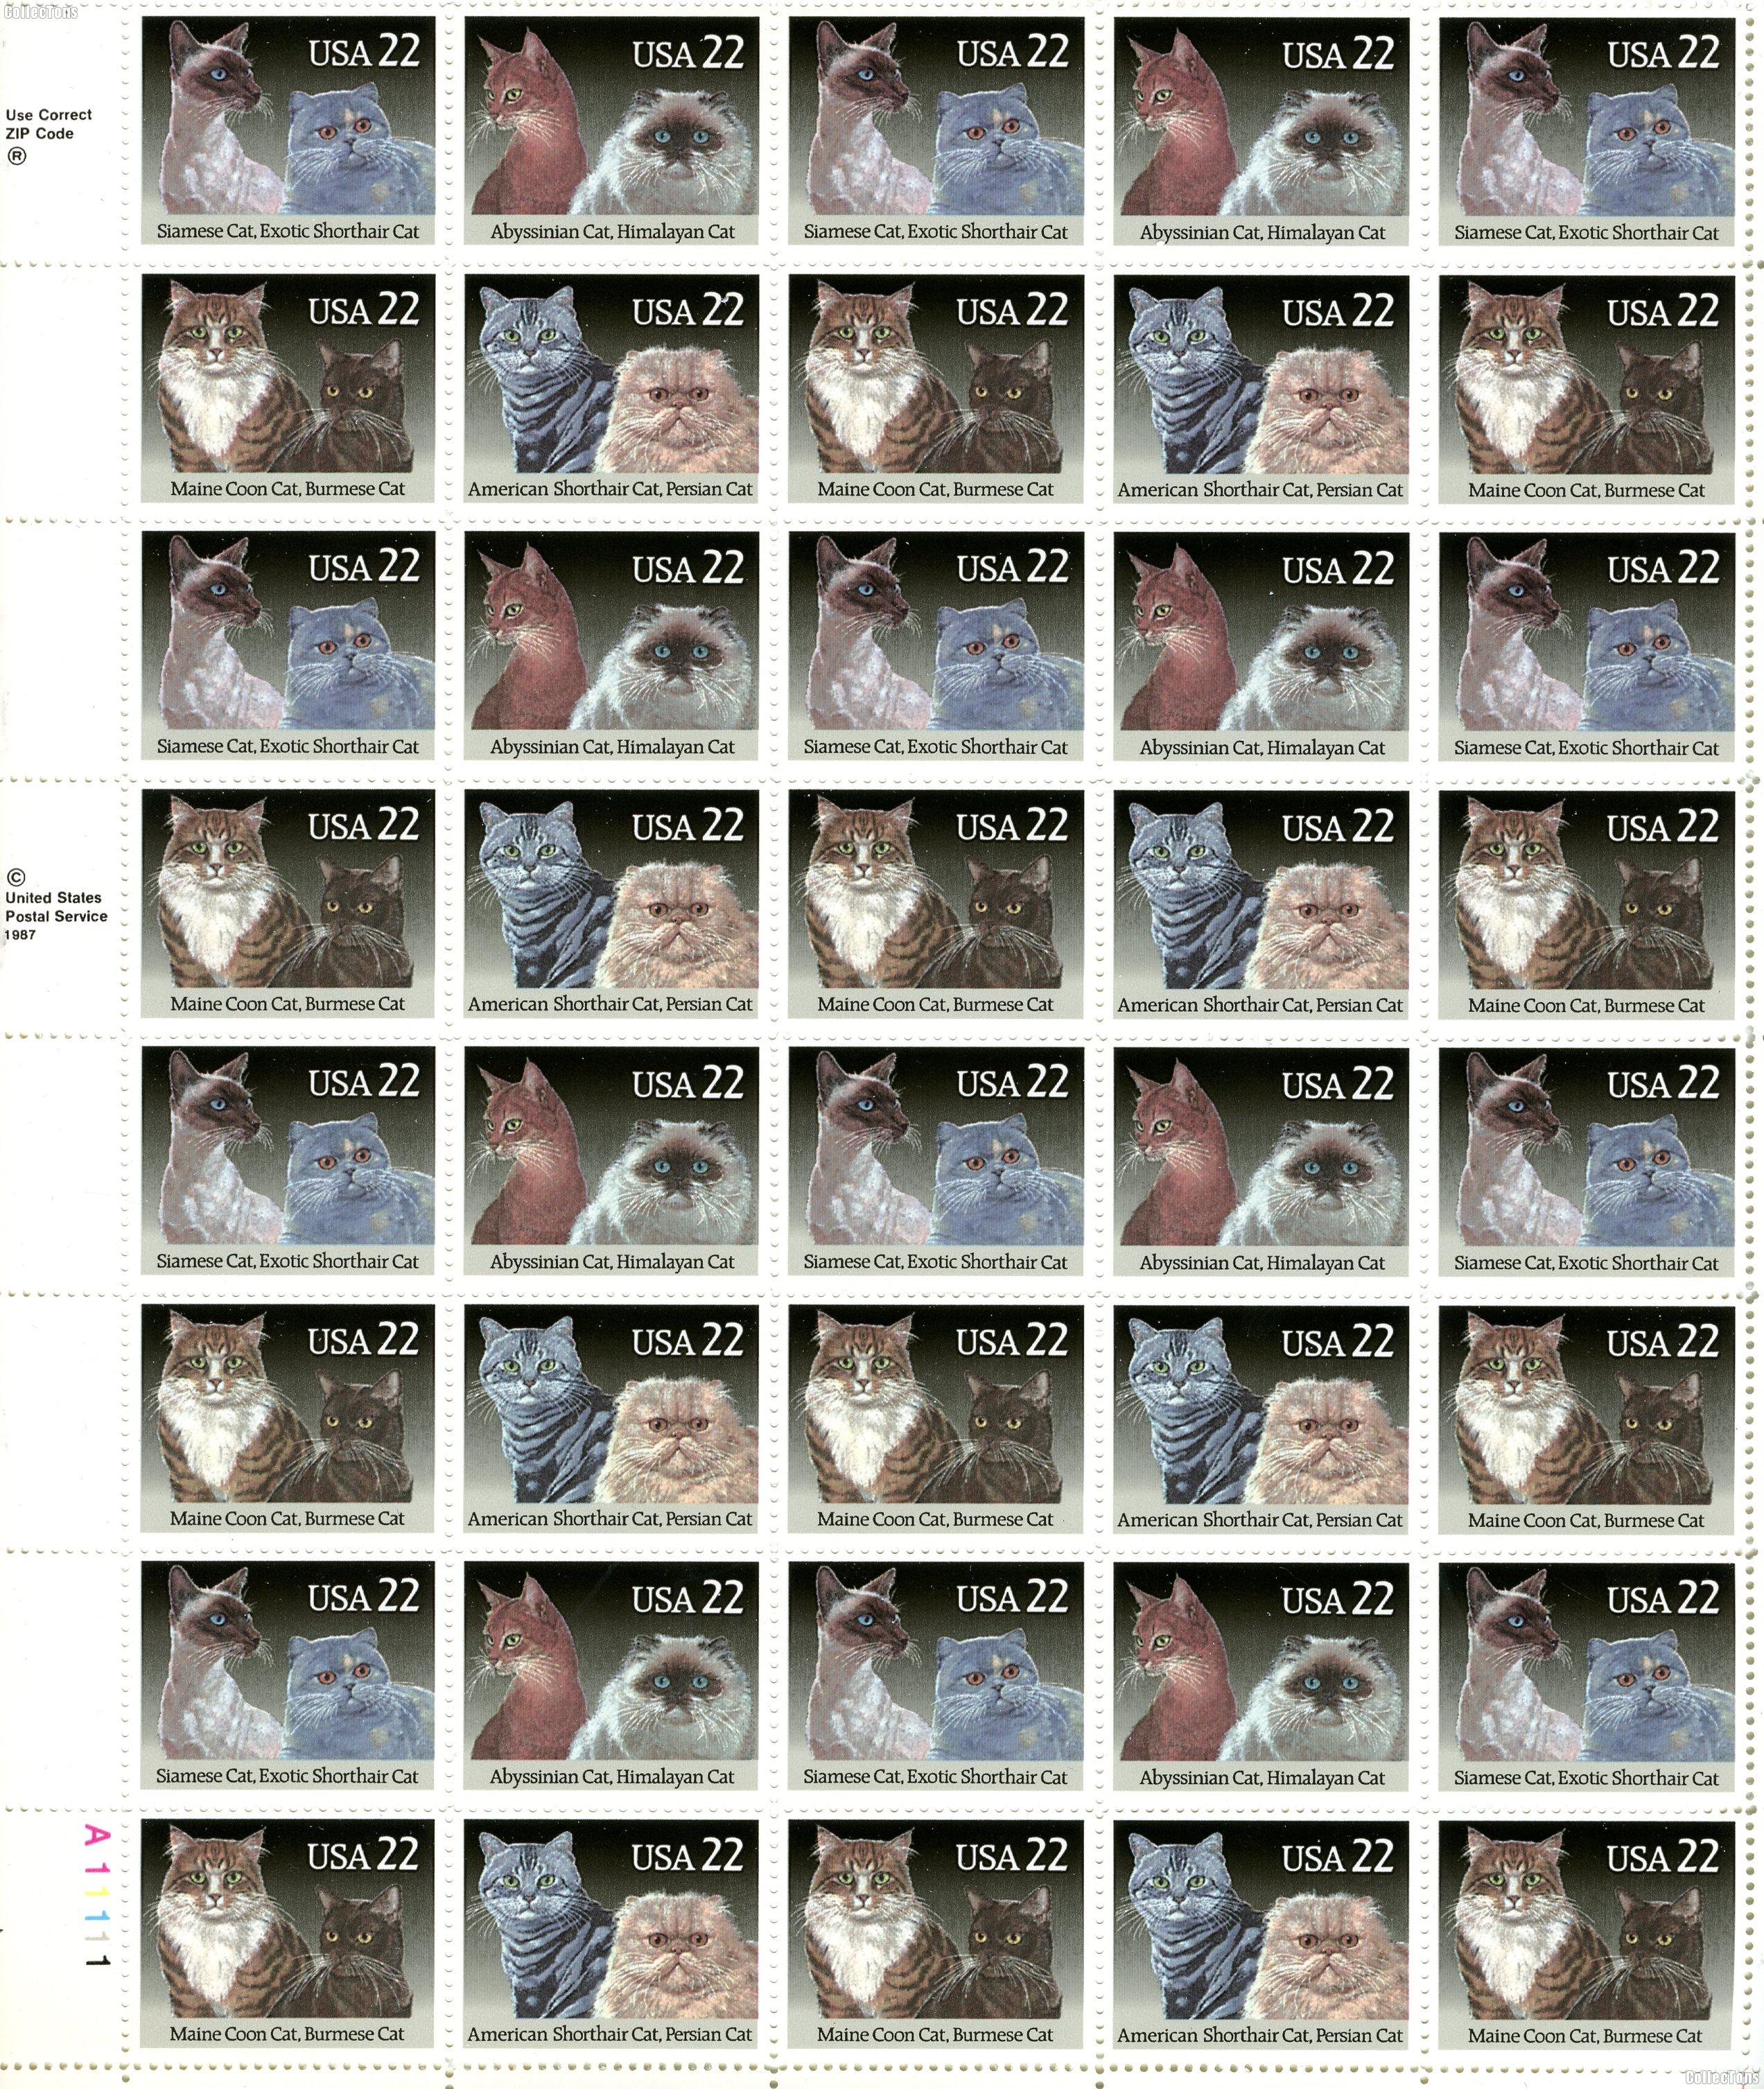 1988 Cats 25 Cent US Postage Stamp MNH Sheet of 50 Scott #2372-2375